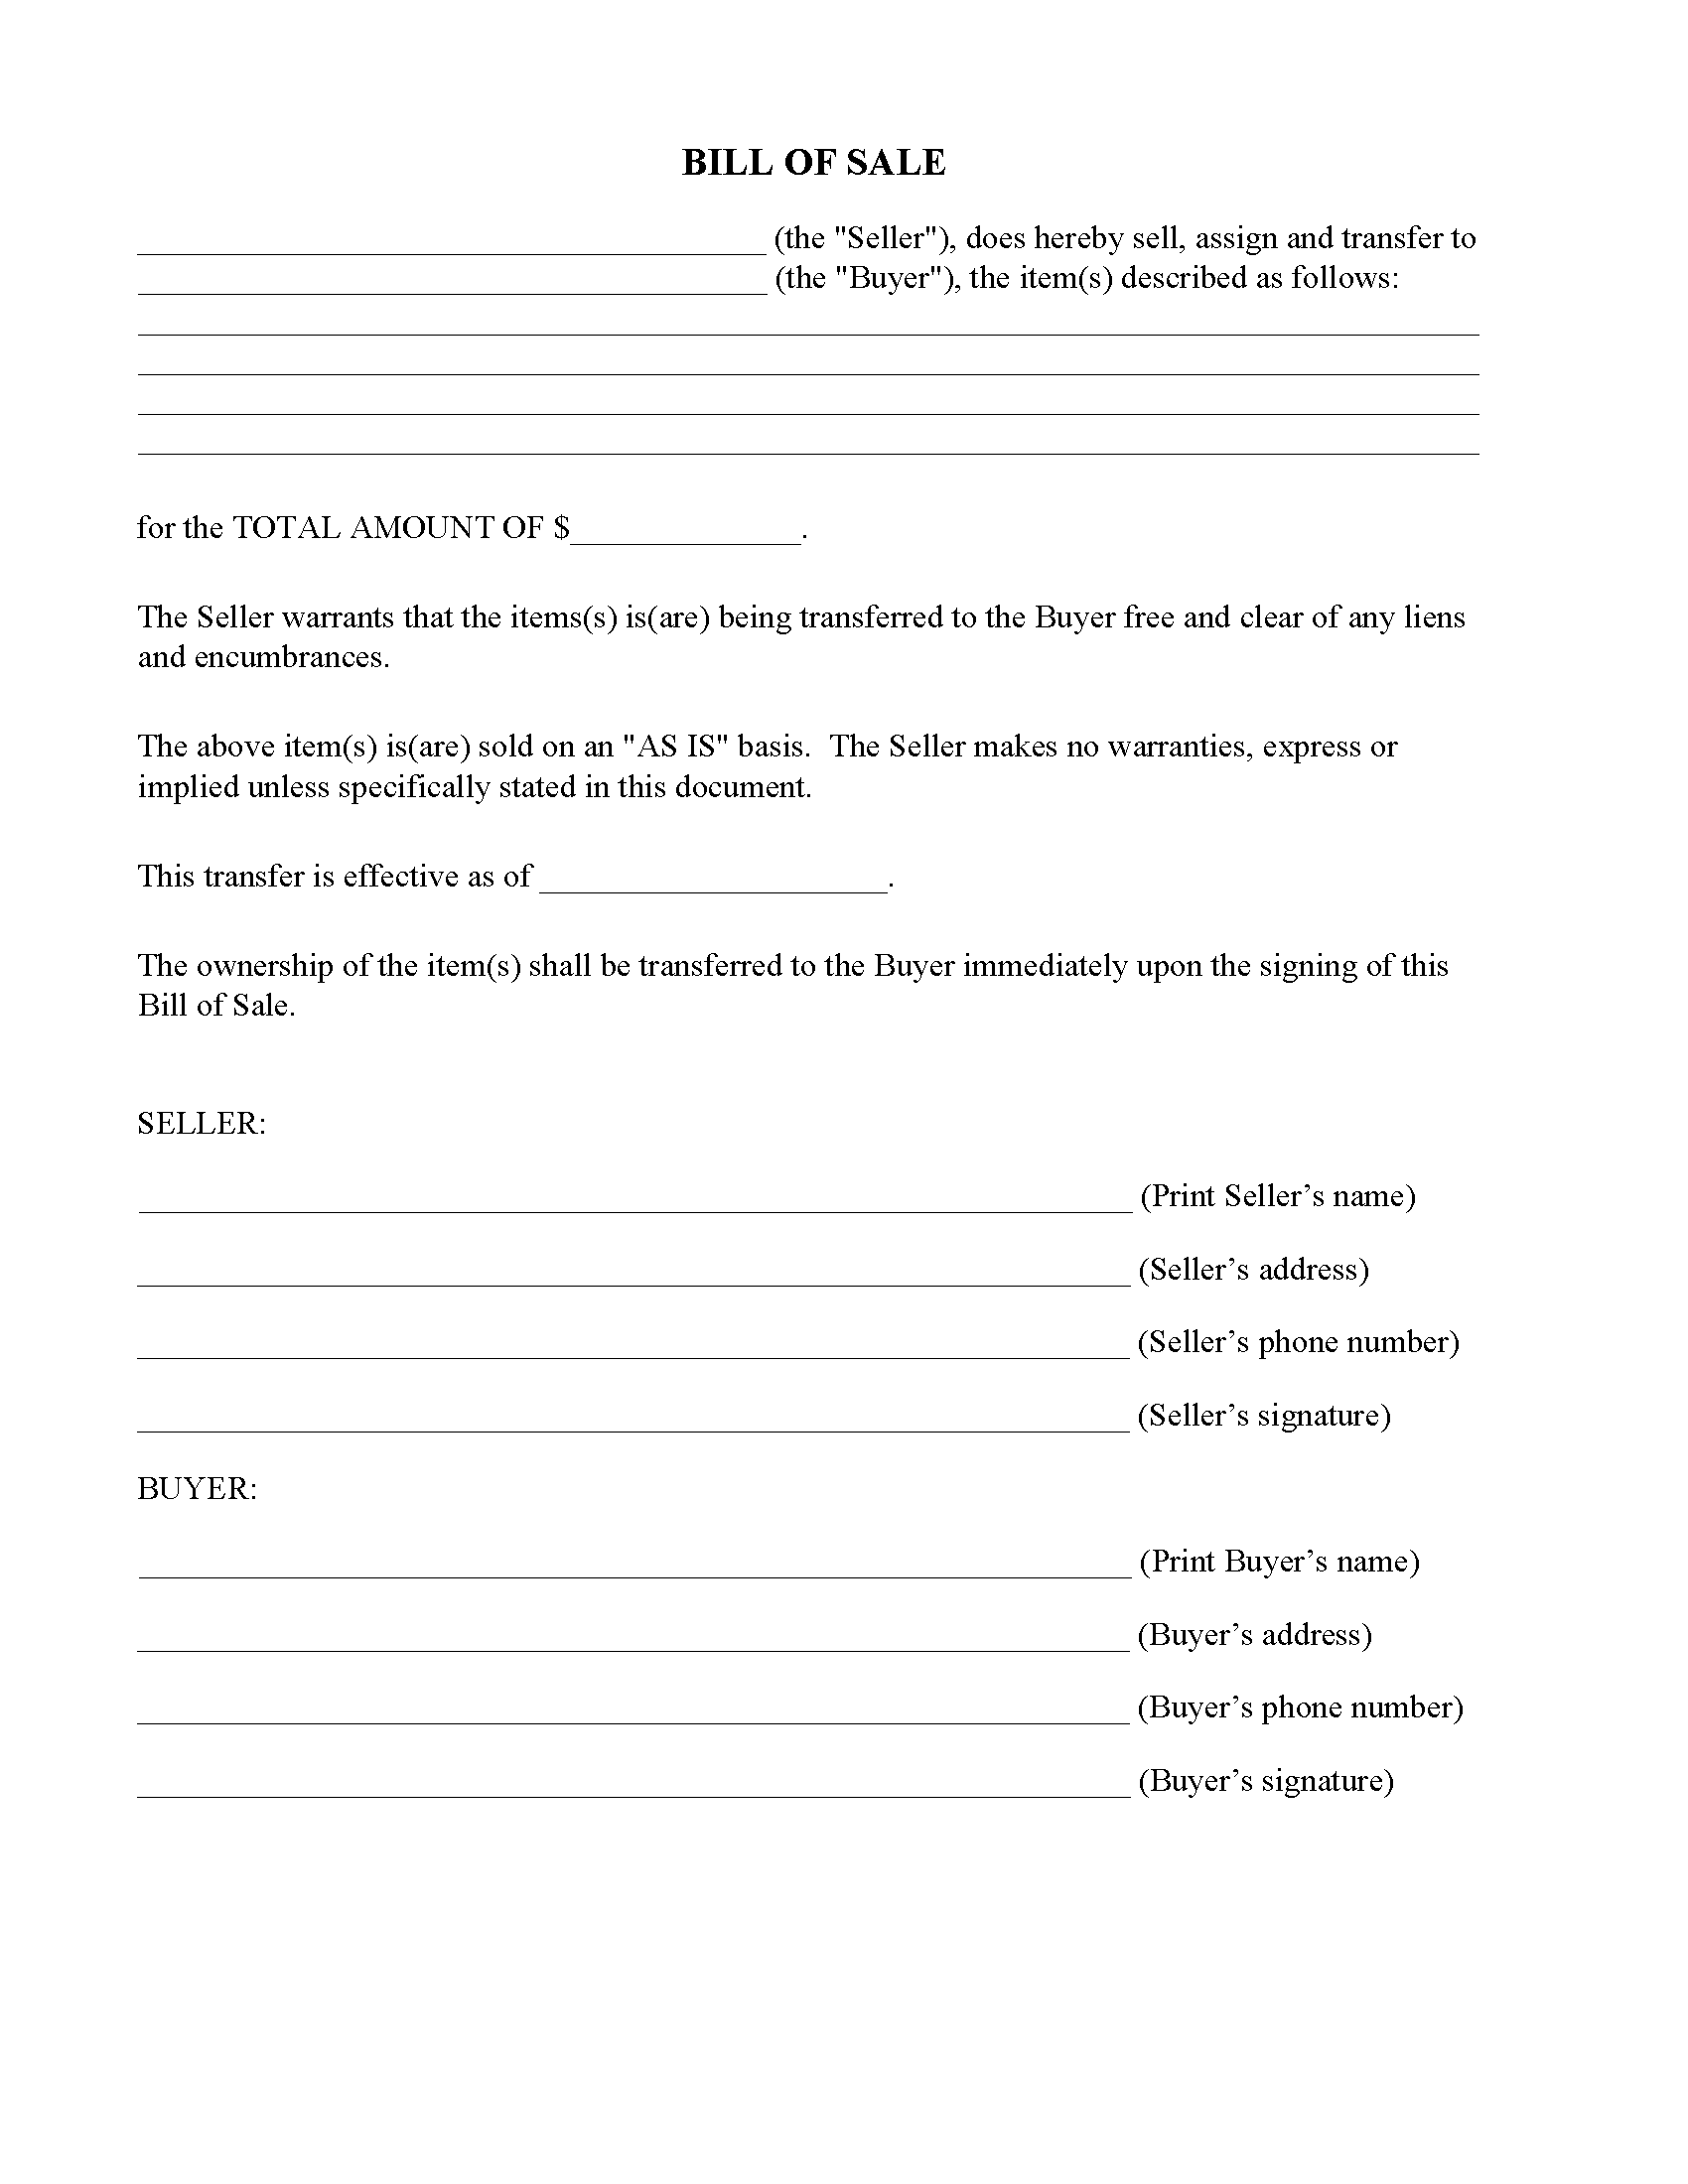 kansas-simple-bill-of-sale-form-free-printable-legal-forms